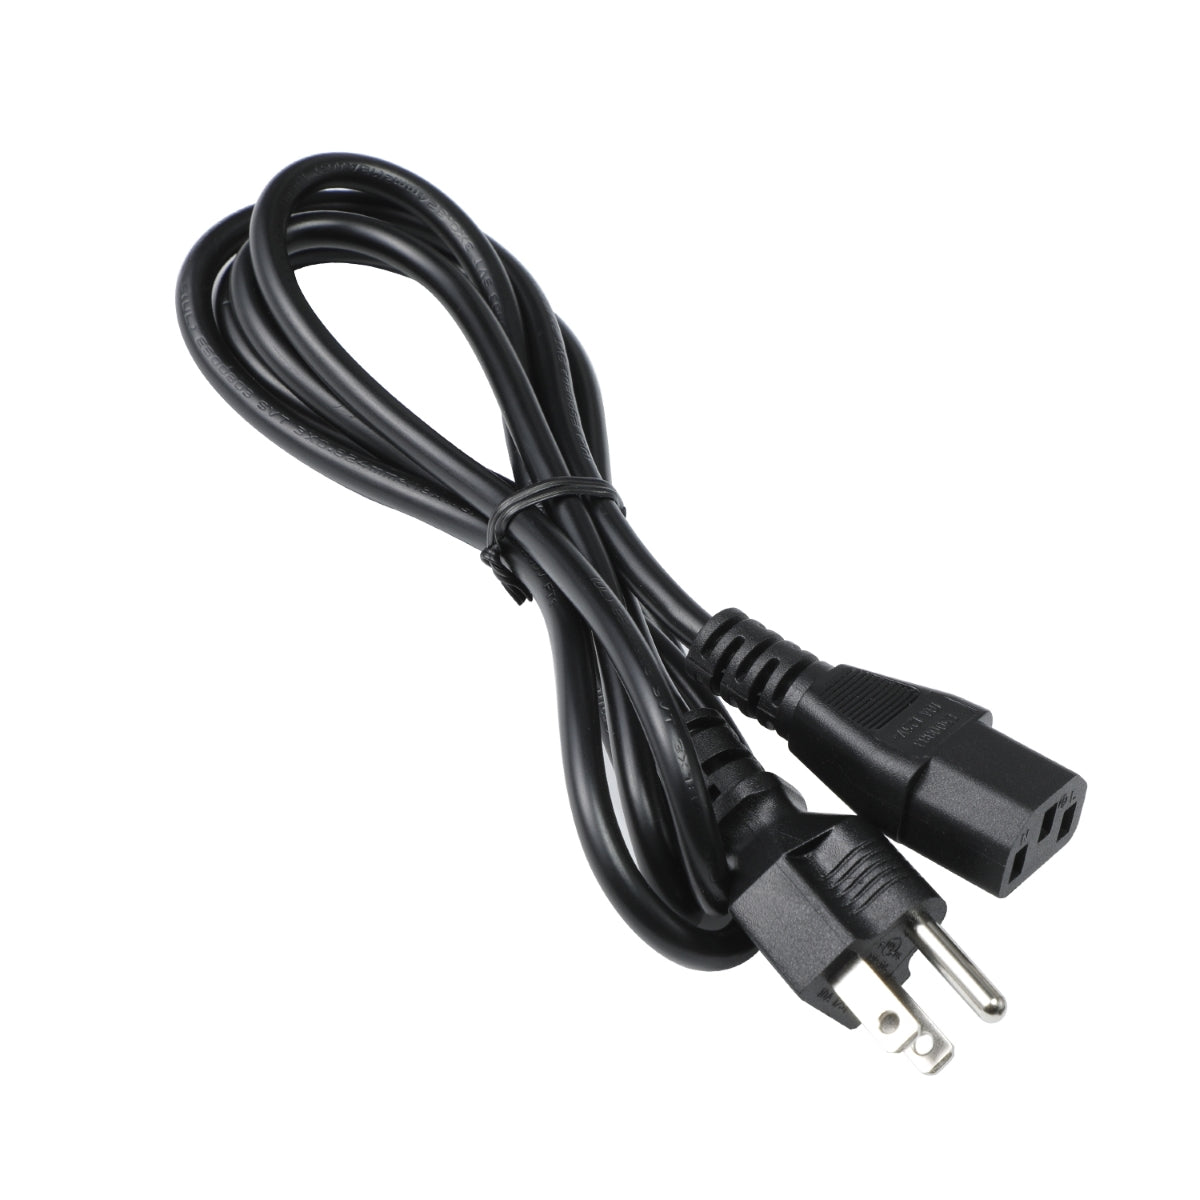 Power Cord for HP Pavilion 550-157c Computer.